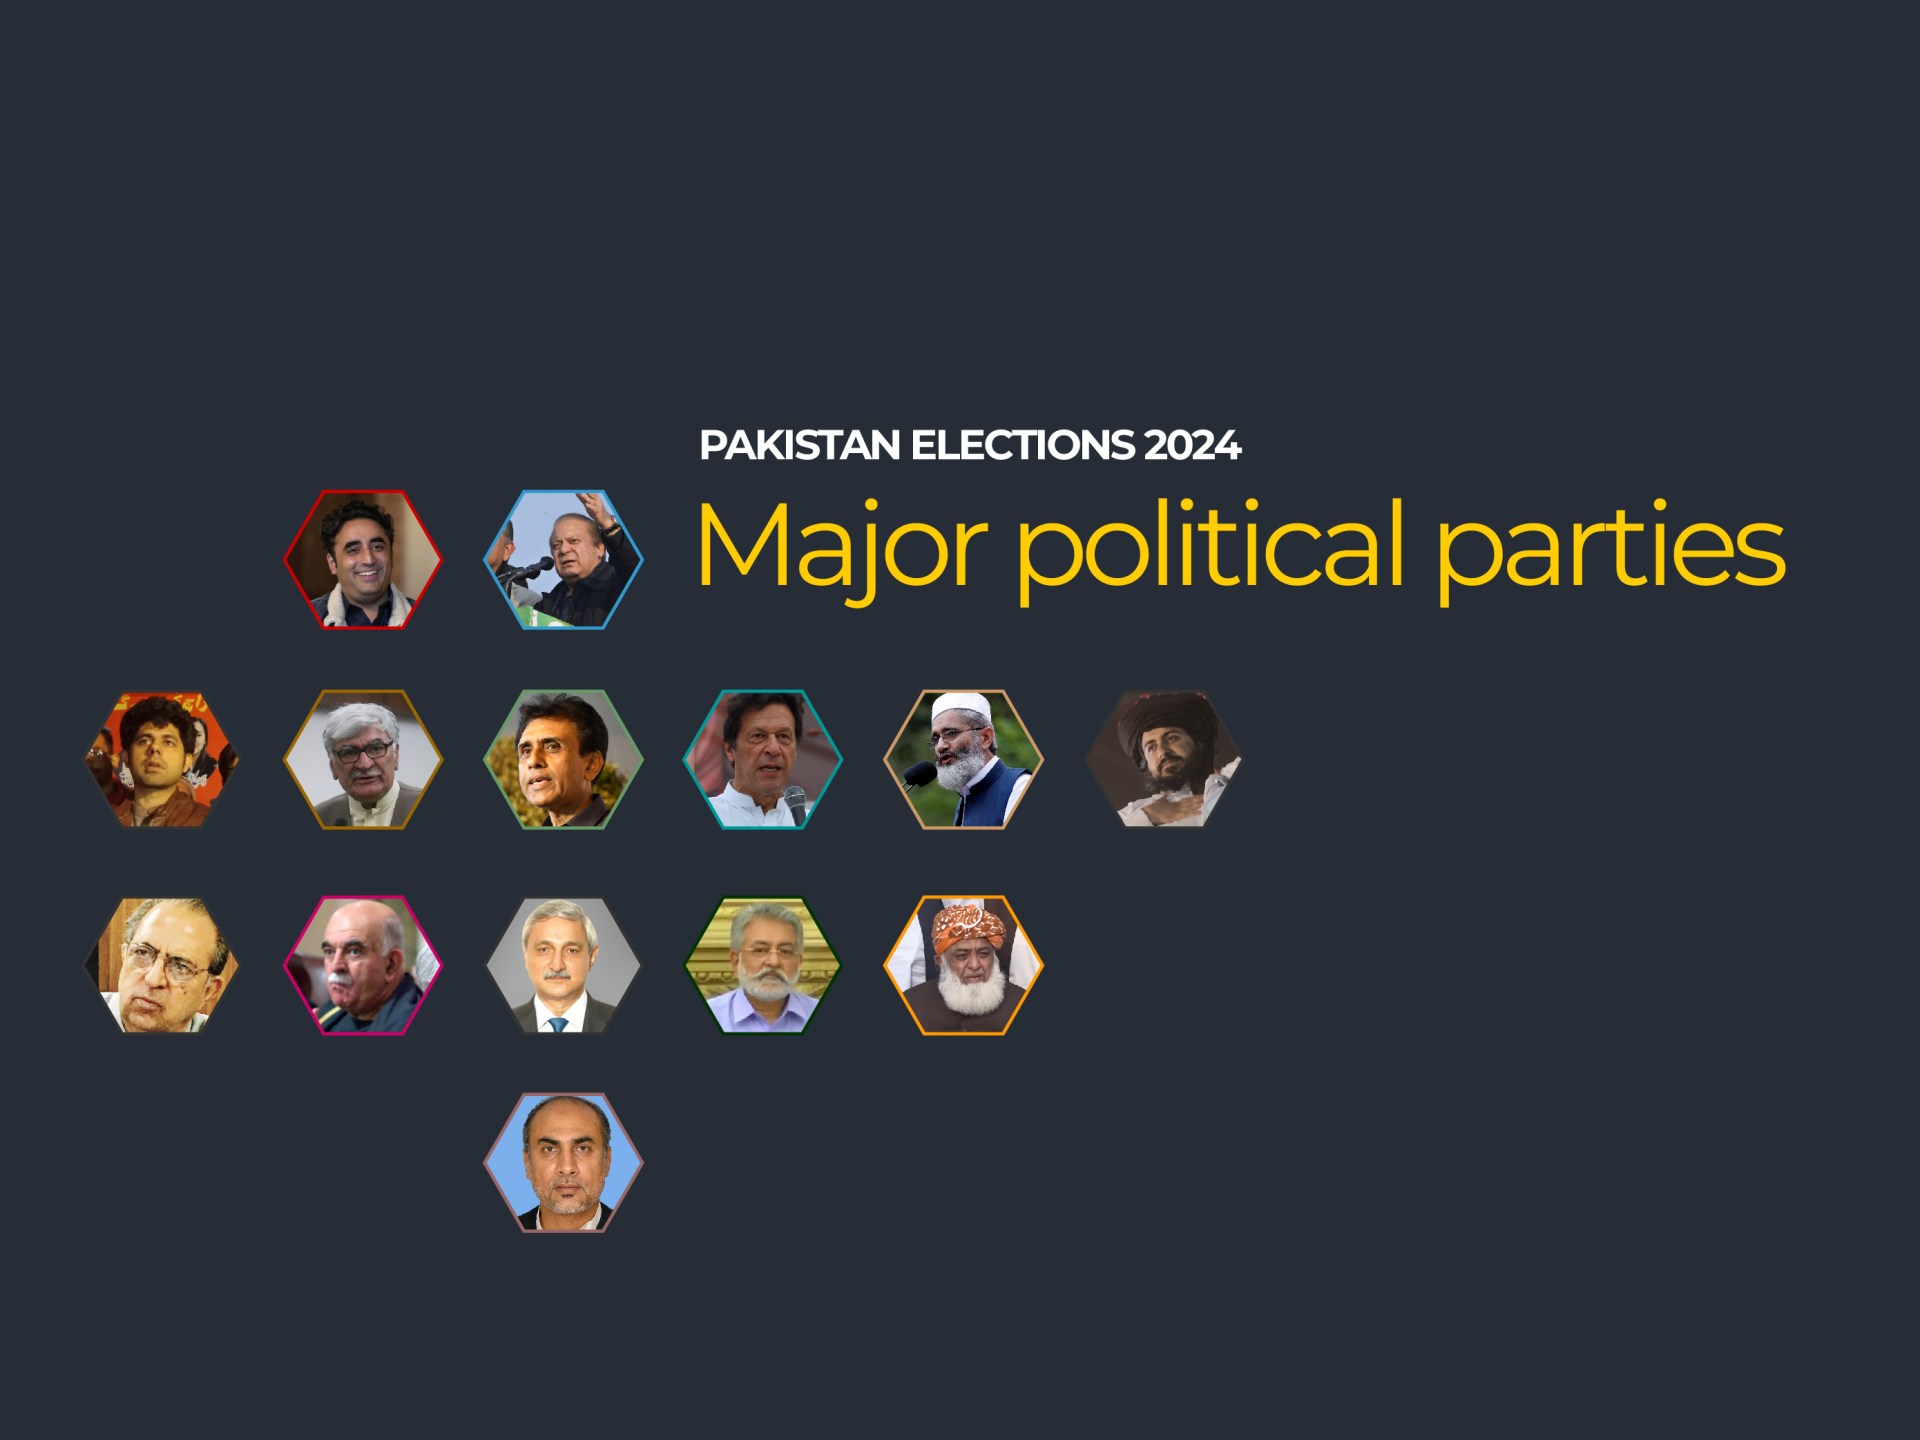 Pakistan elections 2024: Which are the major political parties? | Infographic News